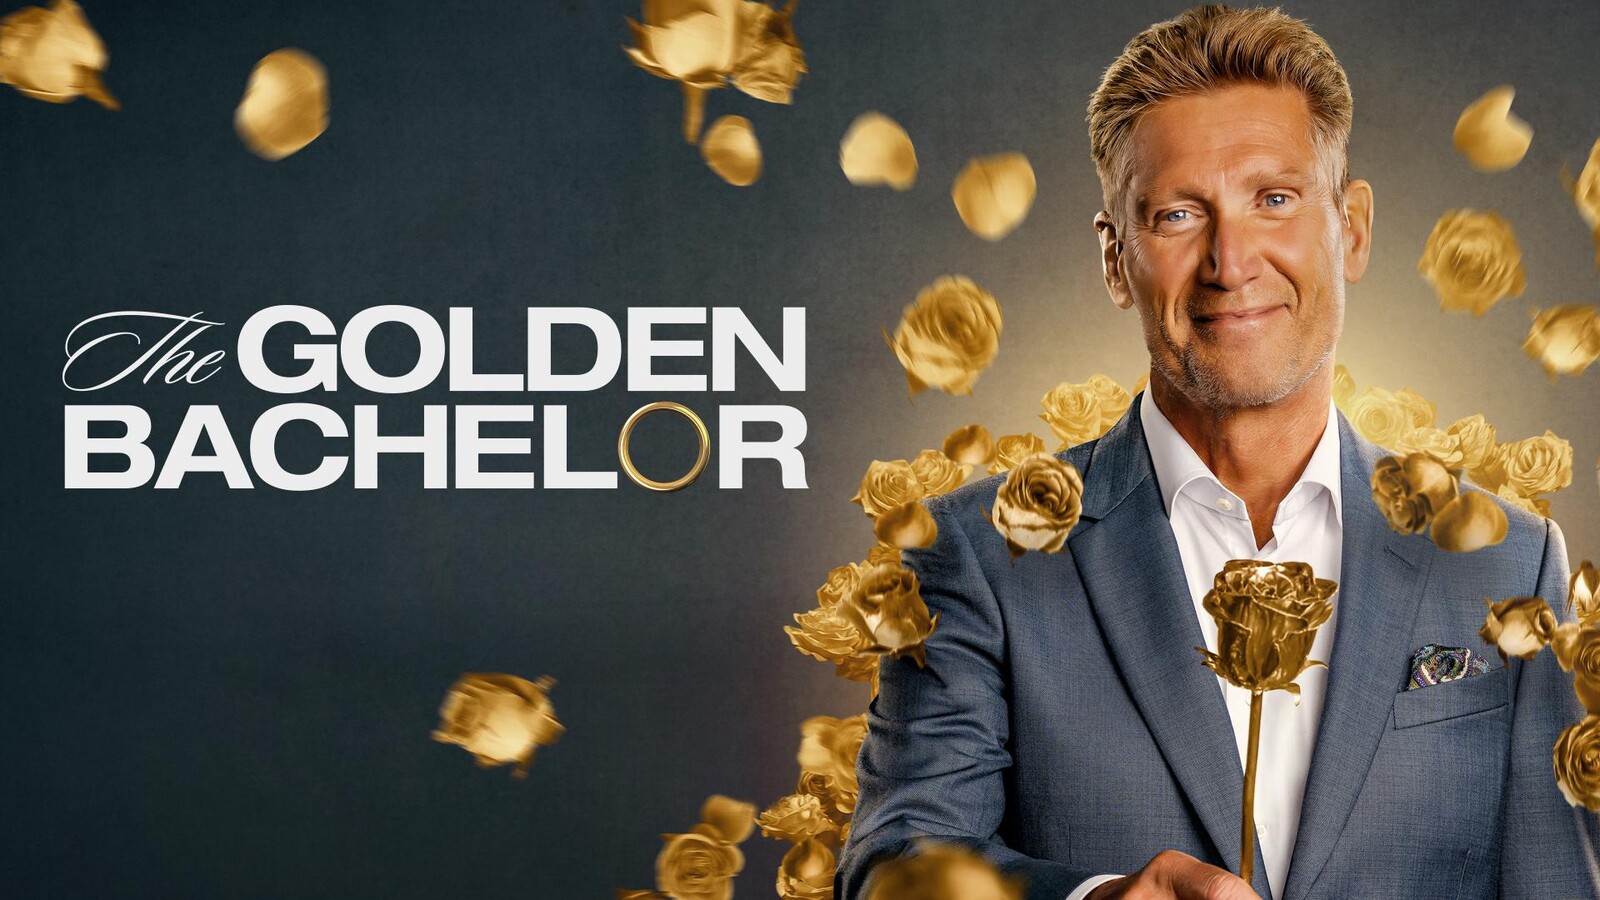 ABC's "The Golden Bachelor" Premiere Episode Hits 11.1 Million Cumulative Viewers in First Week